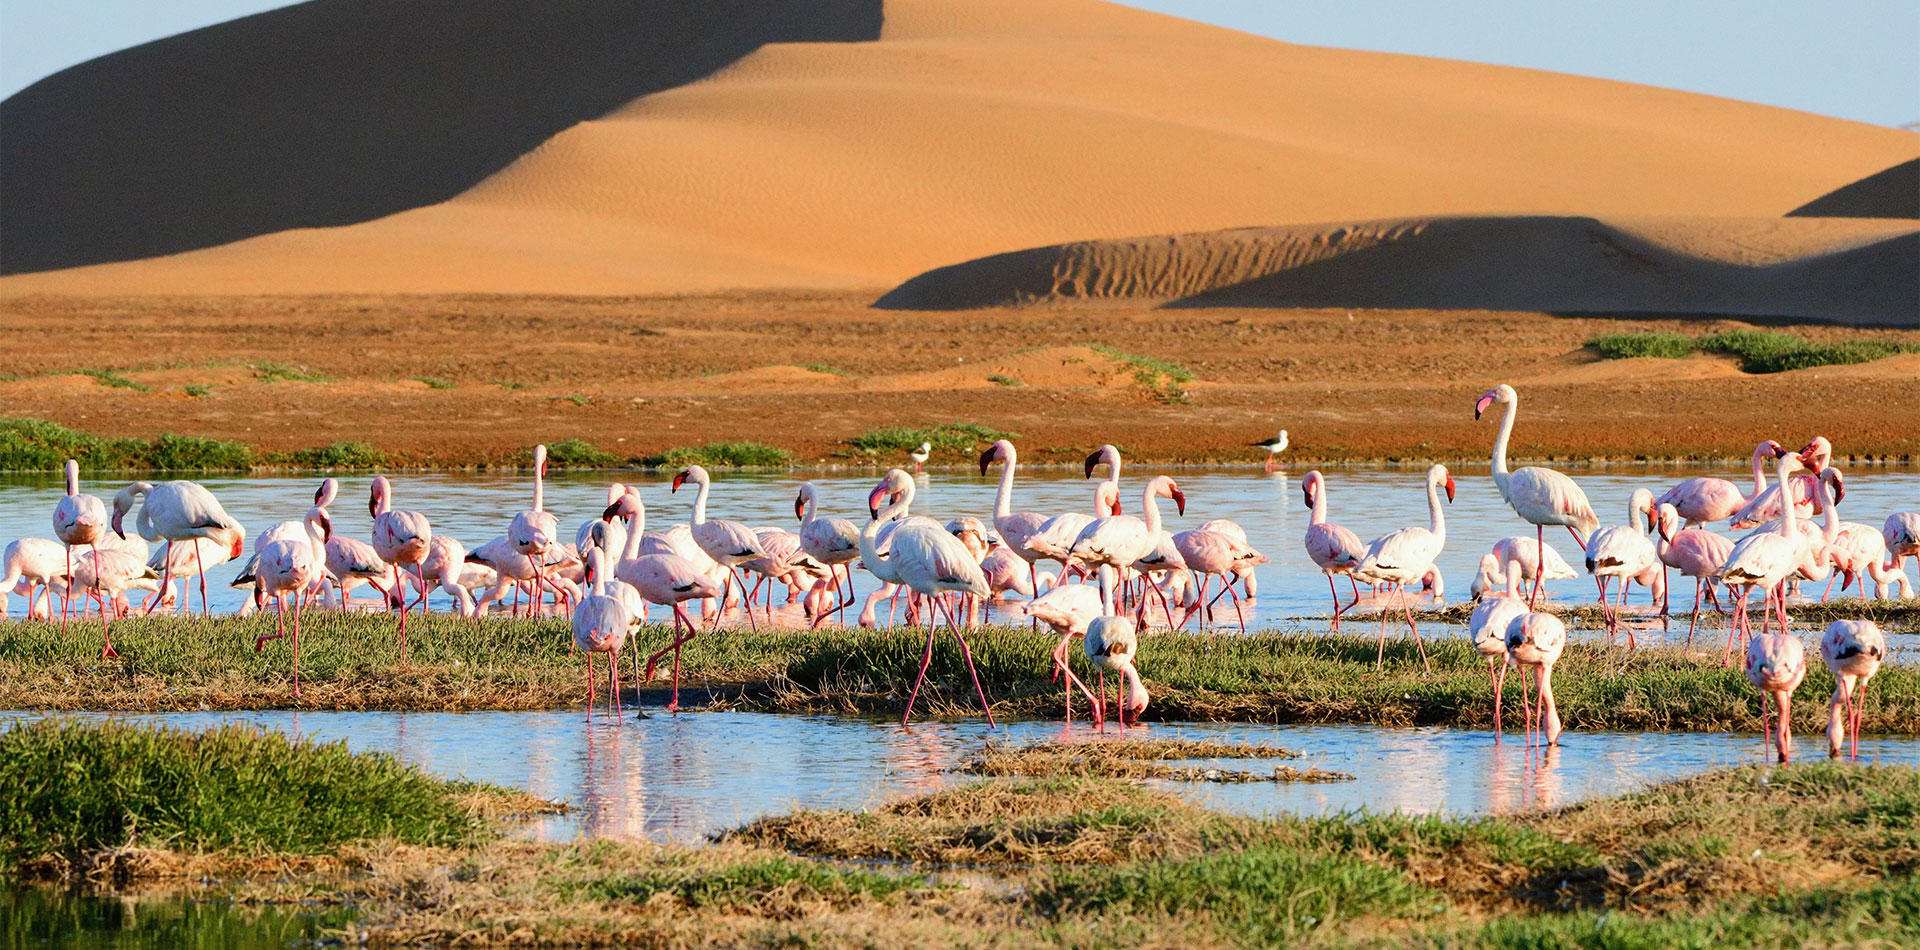 Flamingos in lagoon of Walvis bay, sandy duns in the background. Namibia, Africa